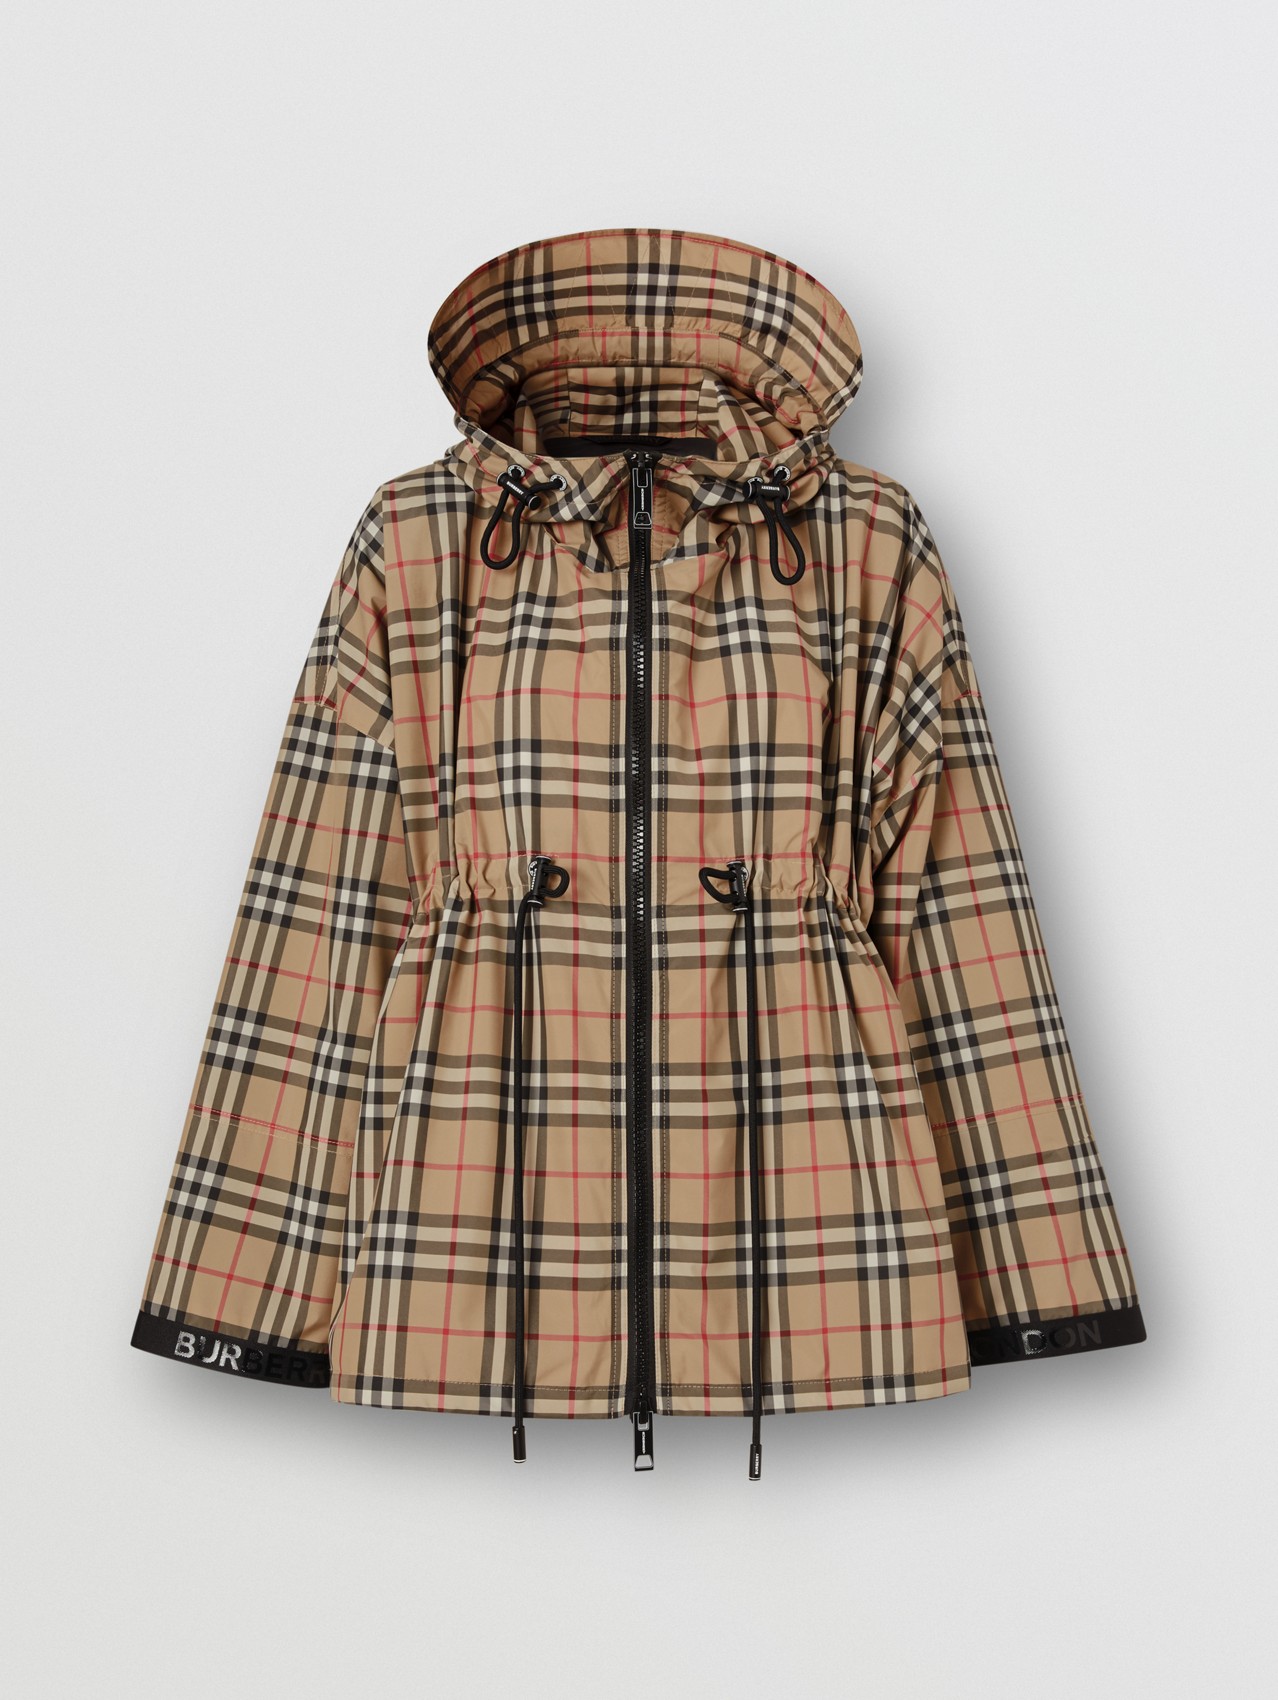 Women's Jackets | Leather & Bomber Jackets | Burberry® Official